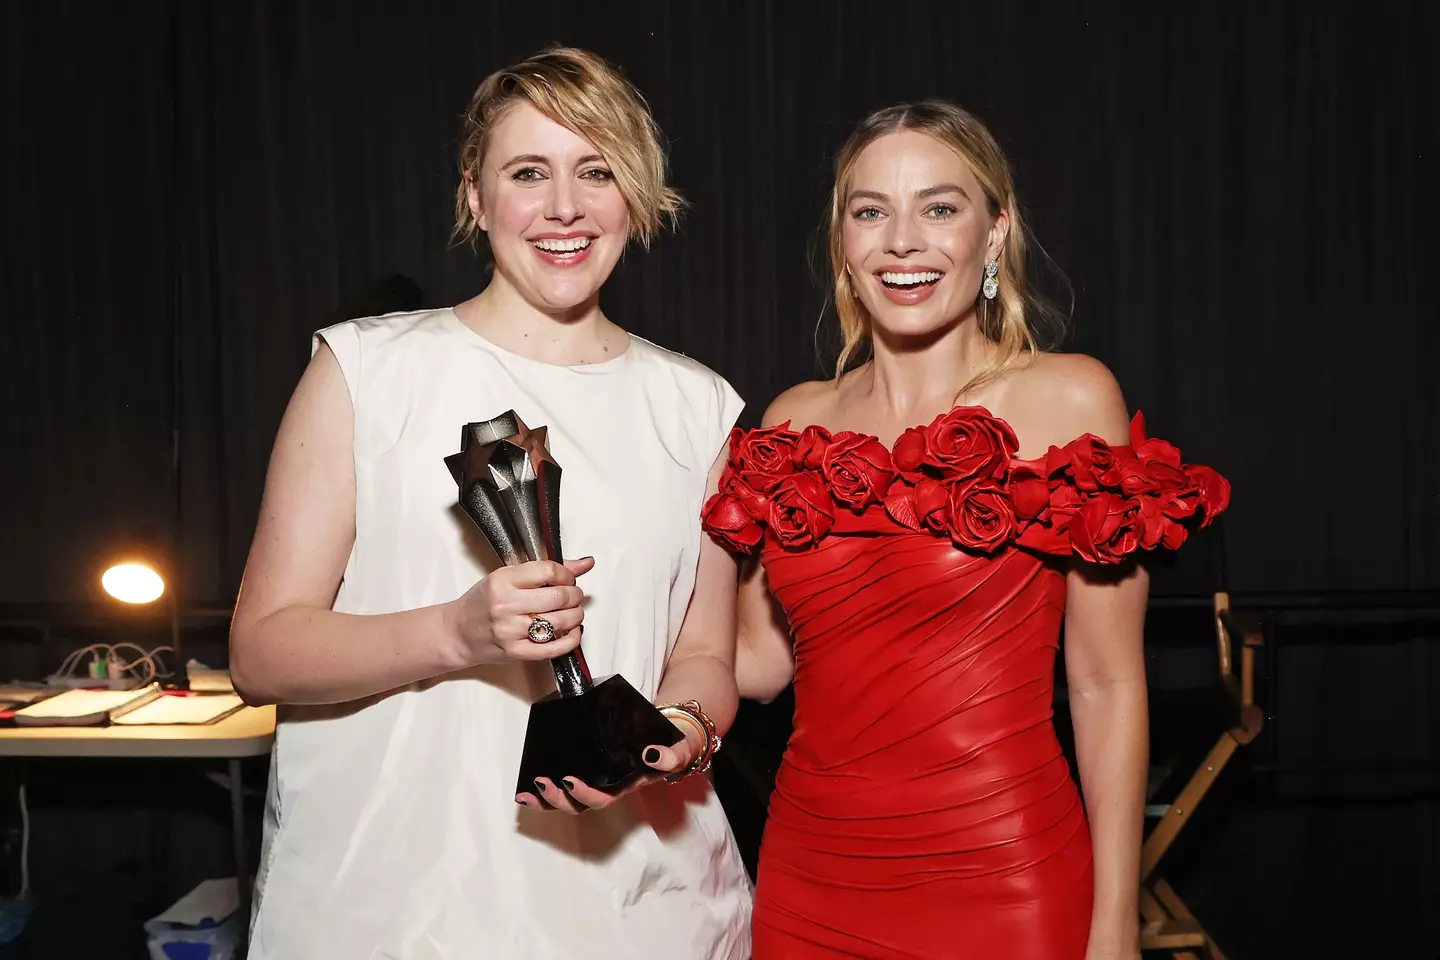 There's no Best Director nomination for Greta Gerwig and Margot Robbie isn't up for Best Actress.